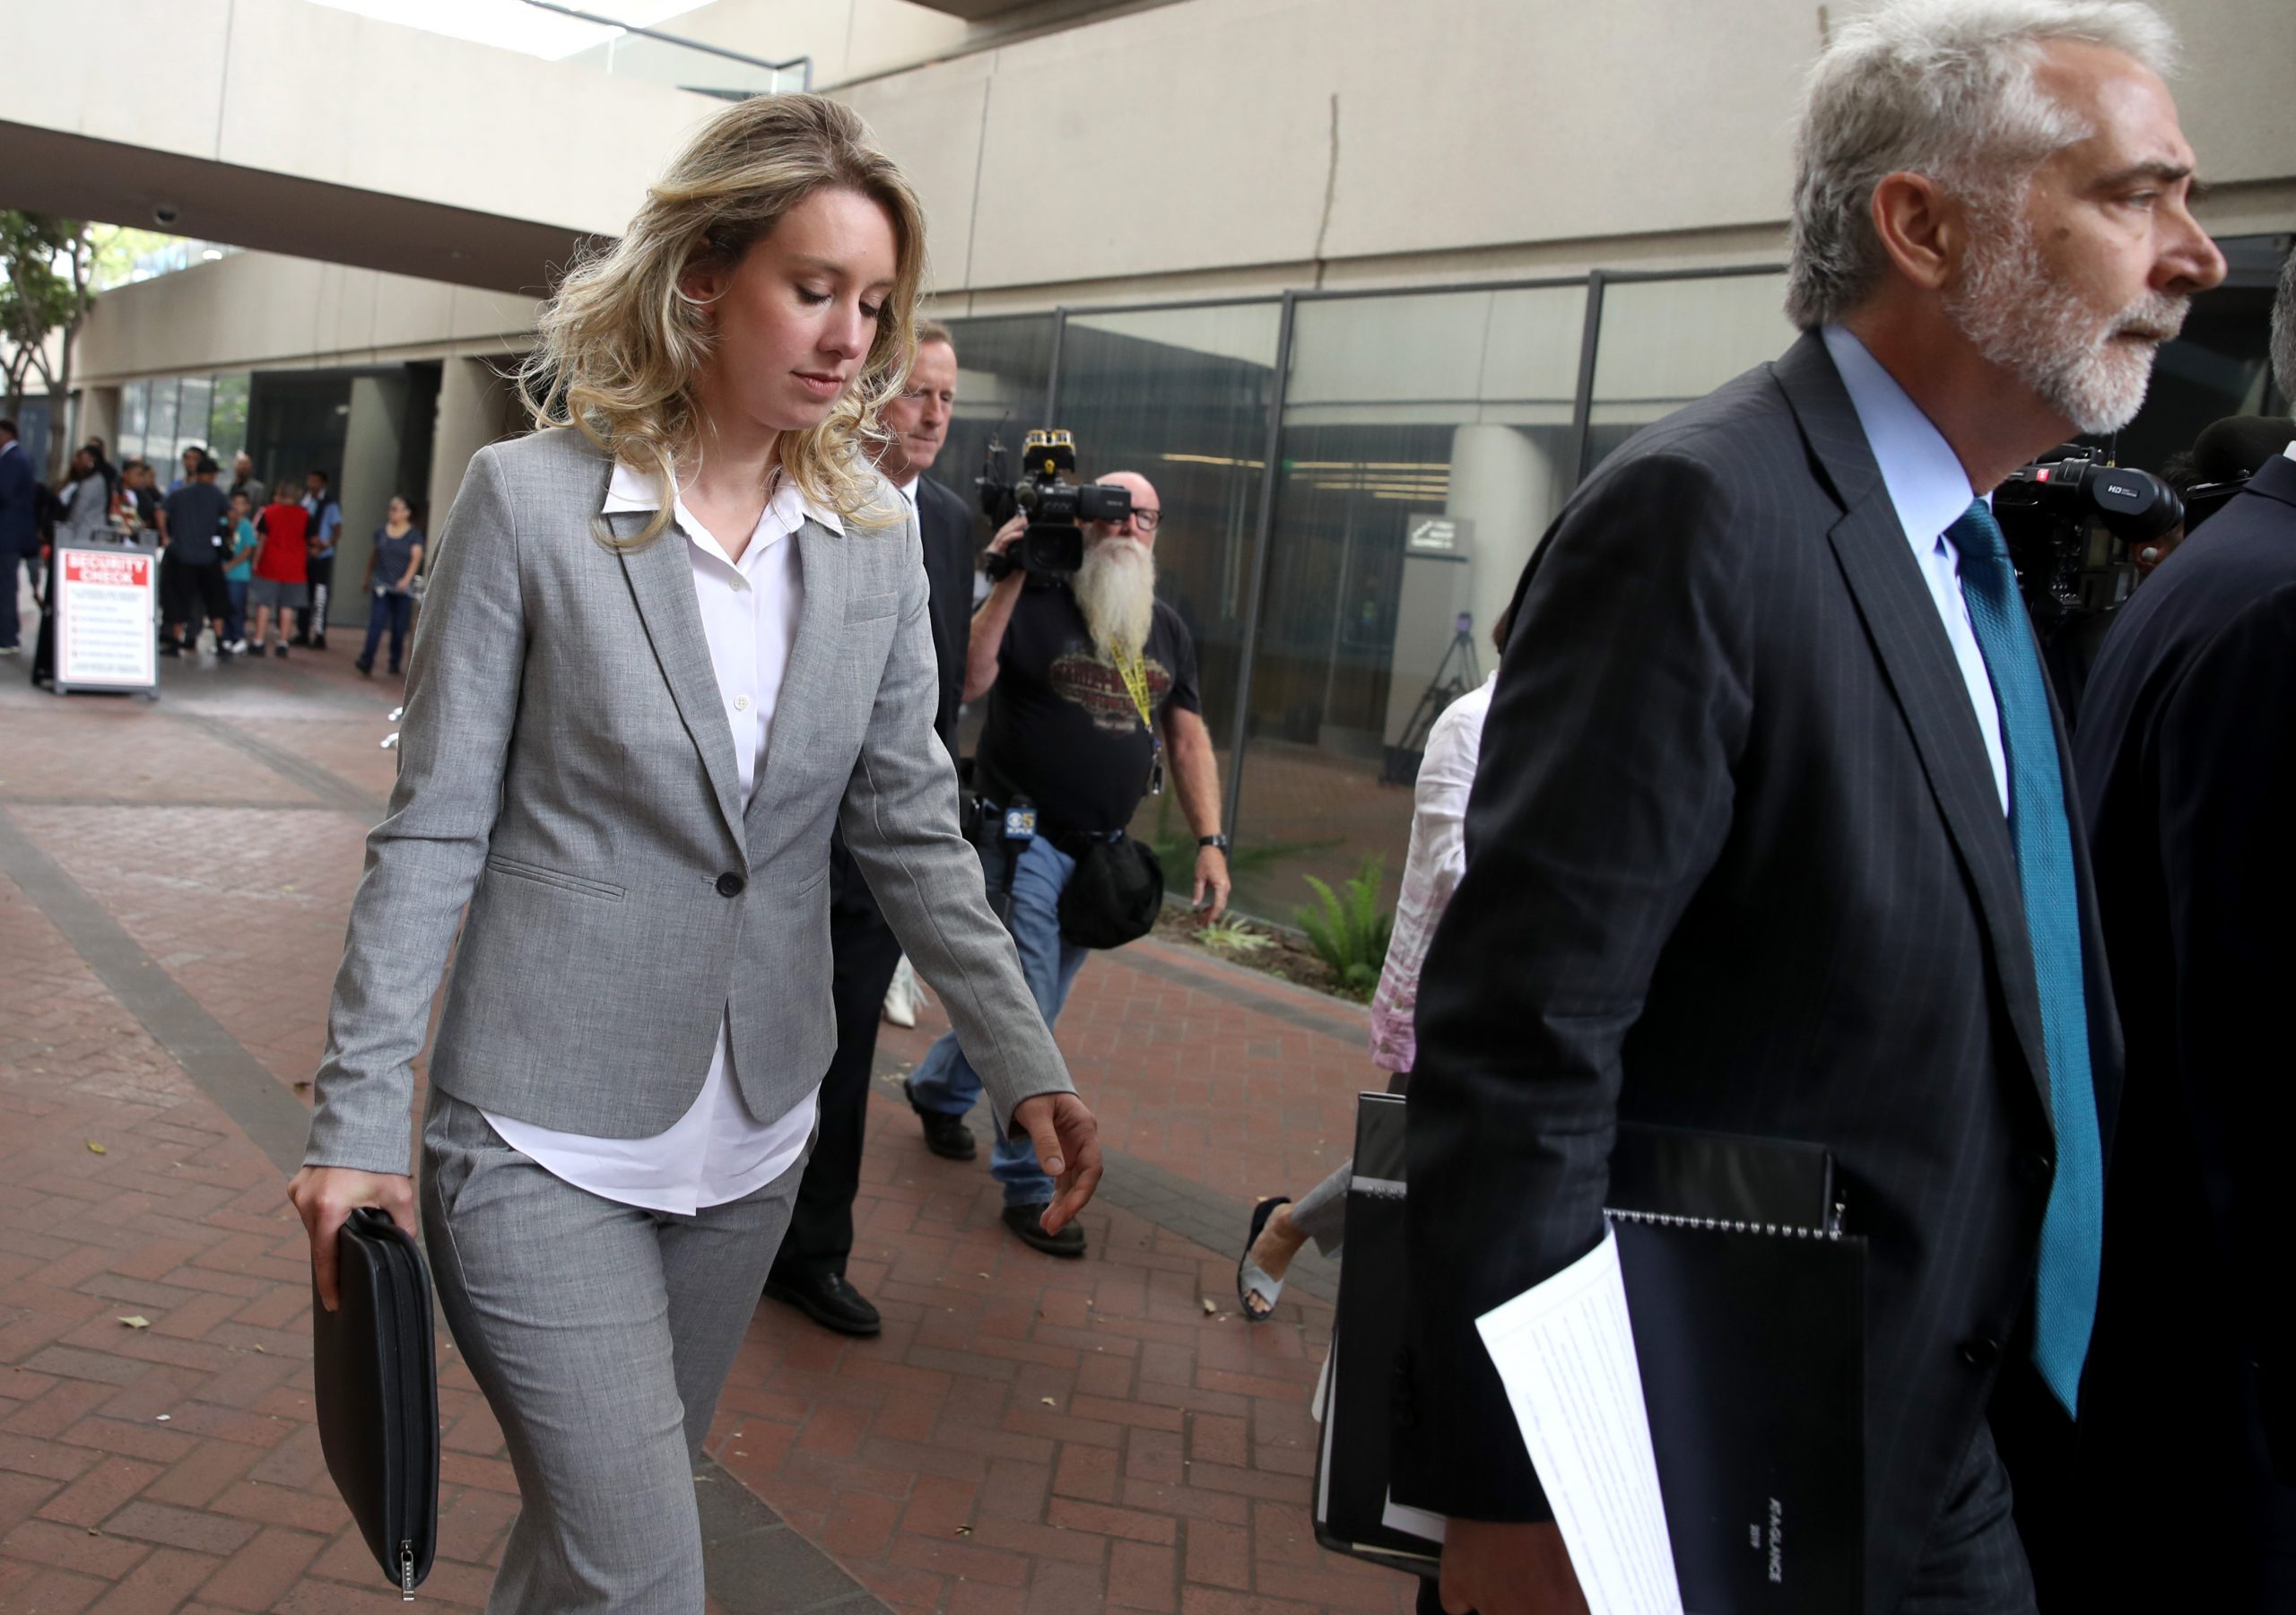 Former Theranos founder and CEO Elizabeth Holmes leaves the Robert F. Peckham U.S. Federal Court on June 28, 2019 in San Jose, California.